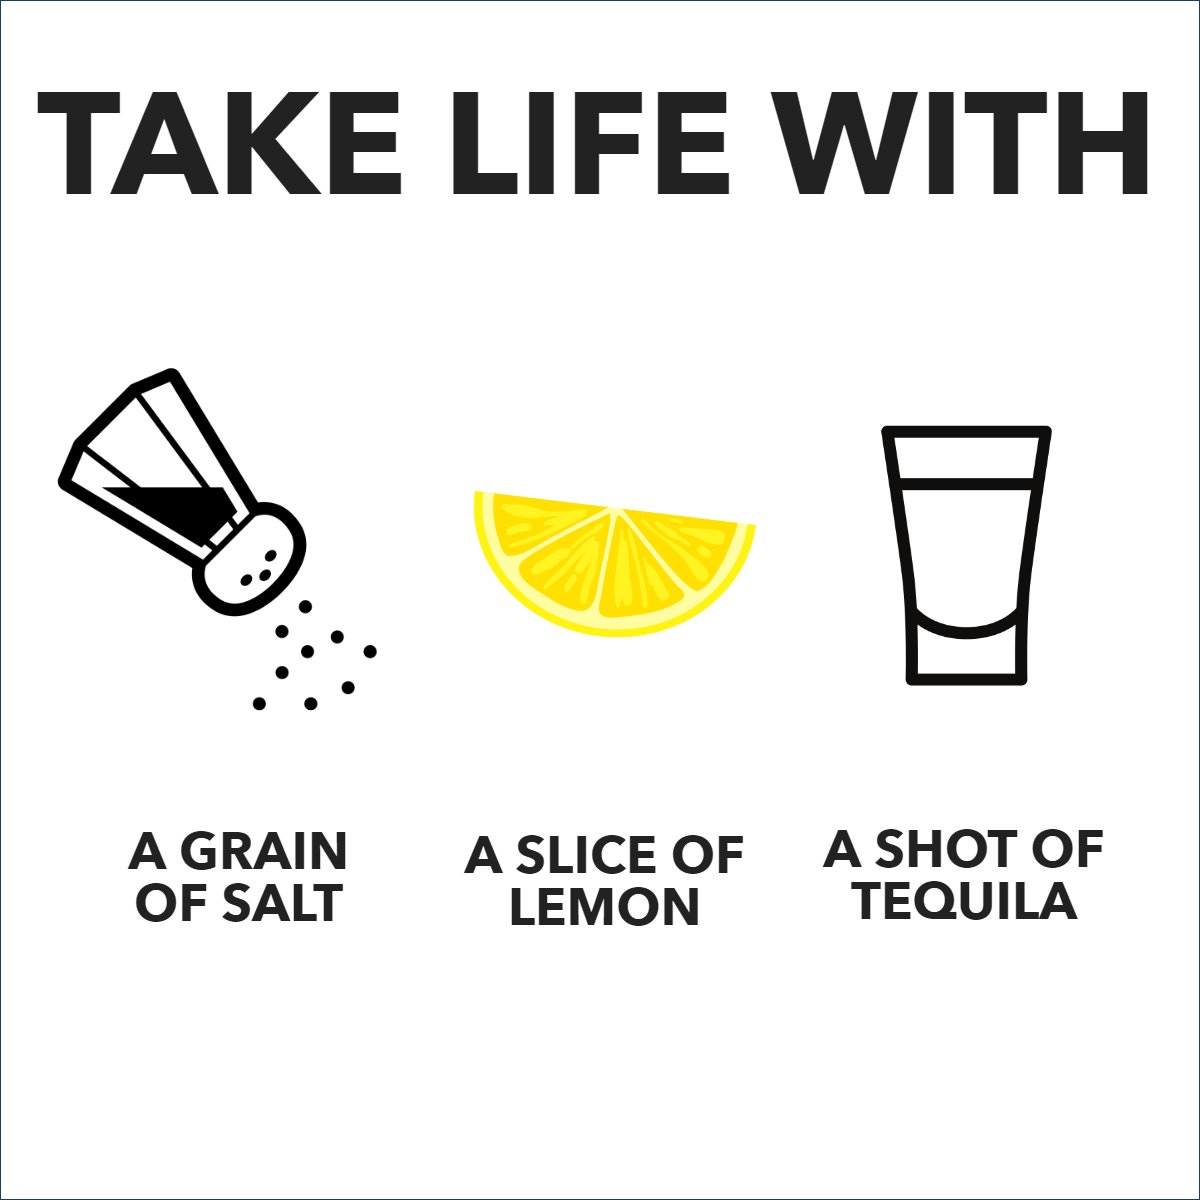 Take life with a grain of salt, a slice of lemon and a shot of tequila... 🧂🍋🥃

#lifeisbetteratthebeach    #tequilashots    #makelifebetter    #lemonslice    #tequilashot    #positive    #positivethinking
#thielhome #thielrealestate #thielsknowsimi